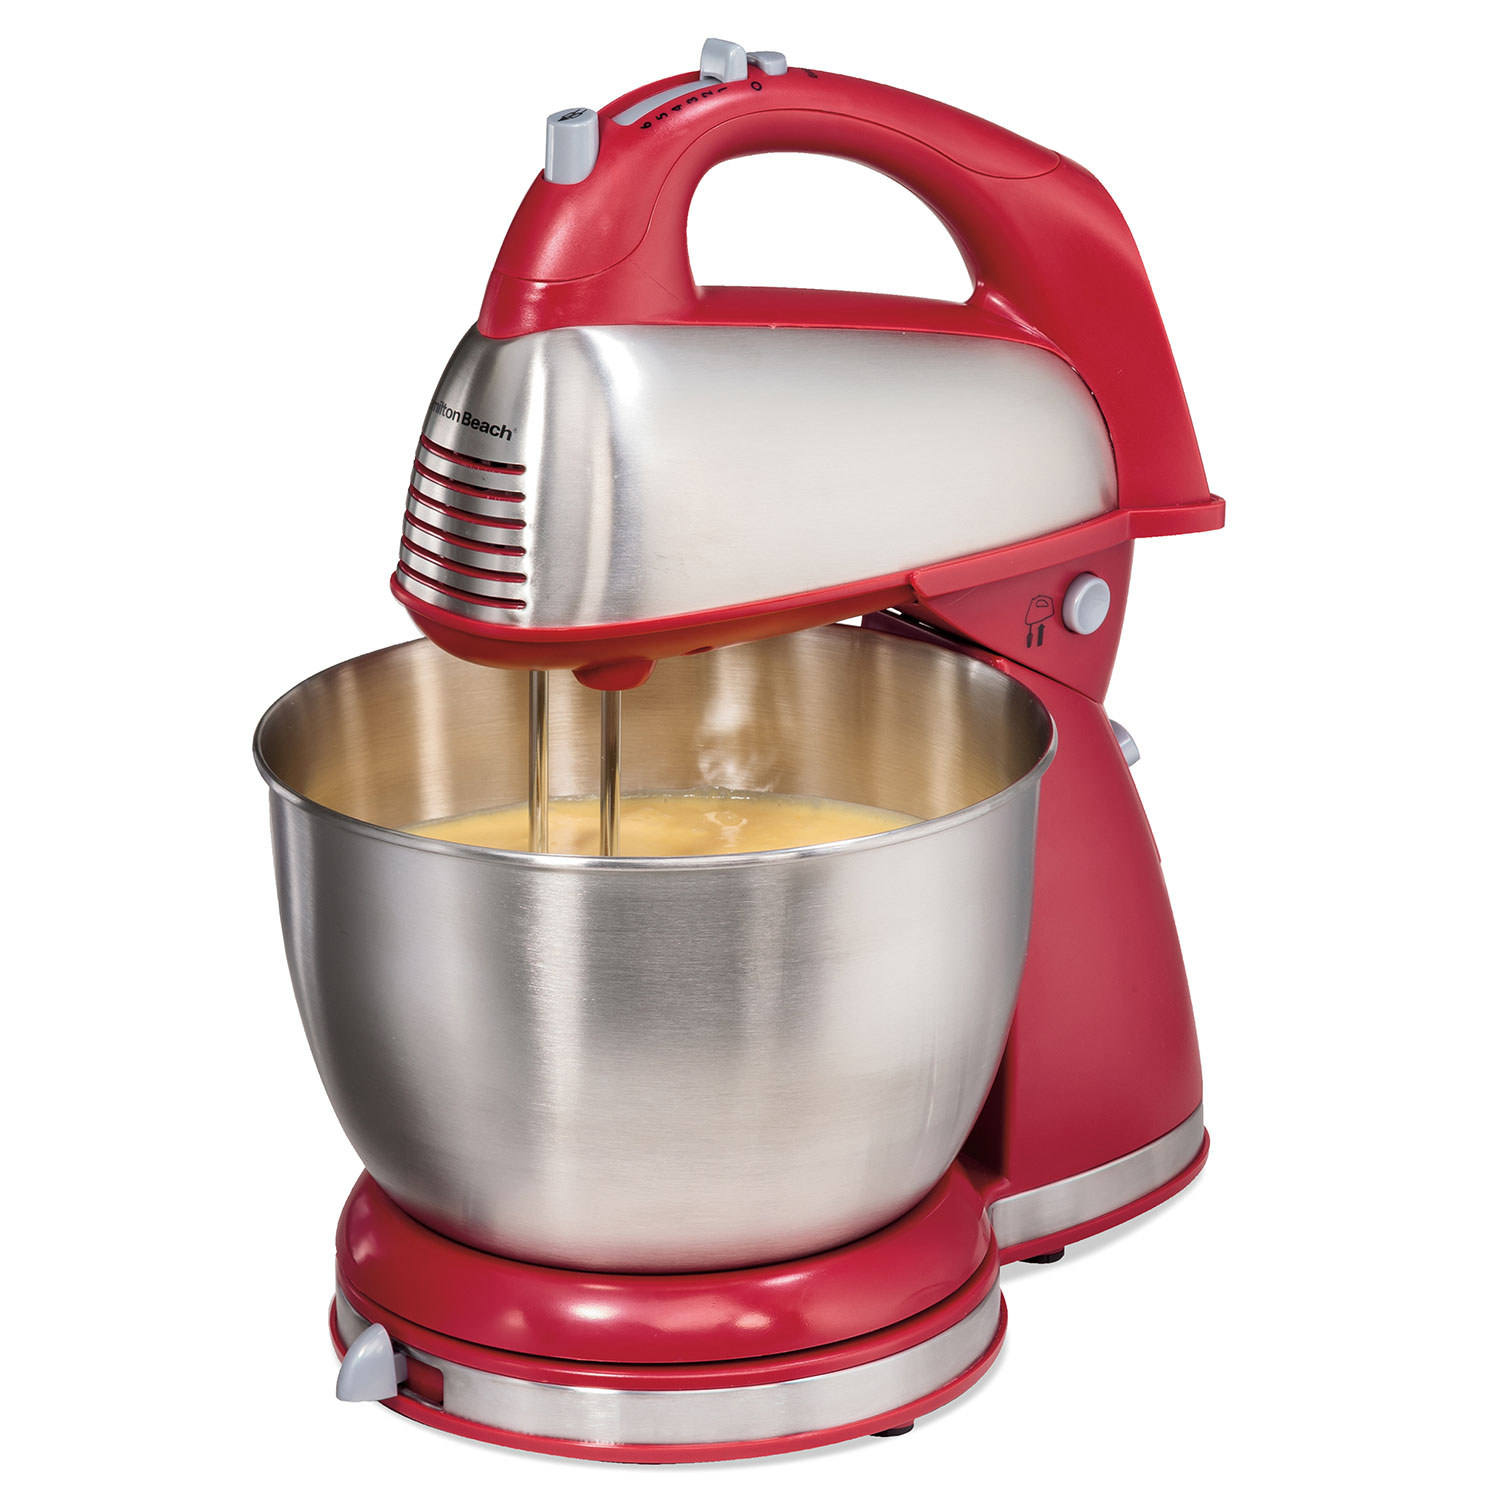 6 Speed Classic Stand Mixer, Red (64654)